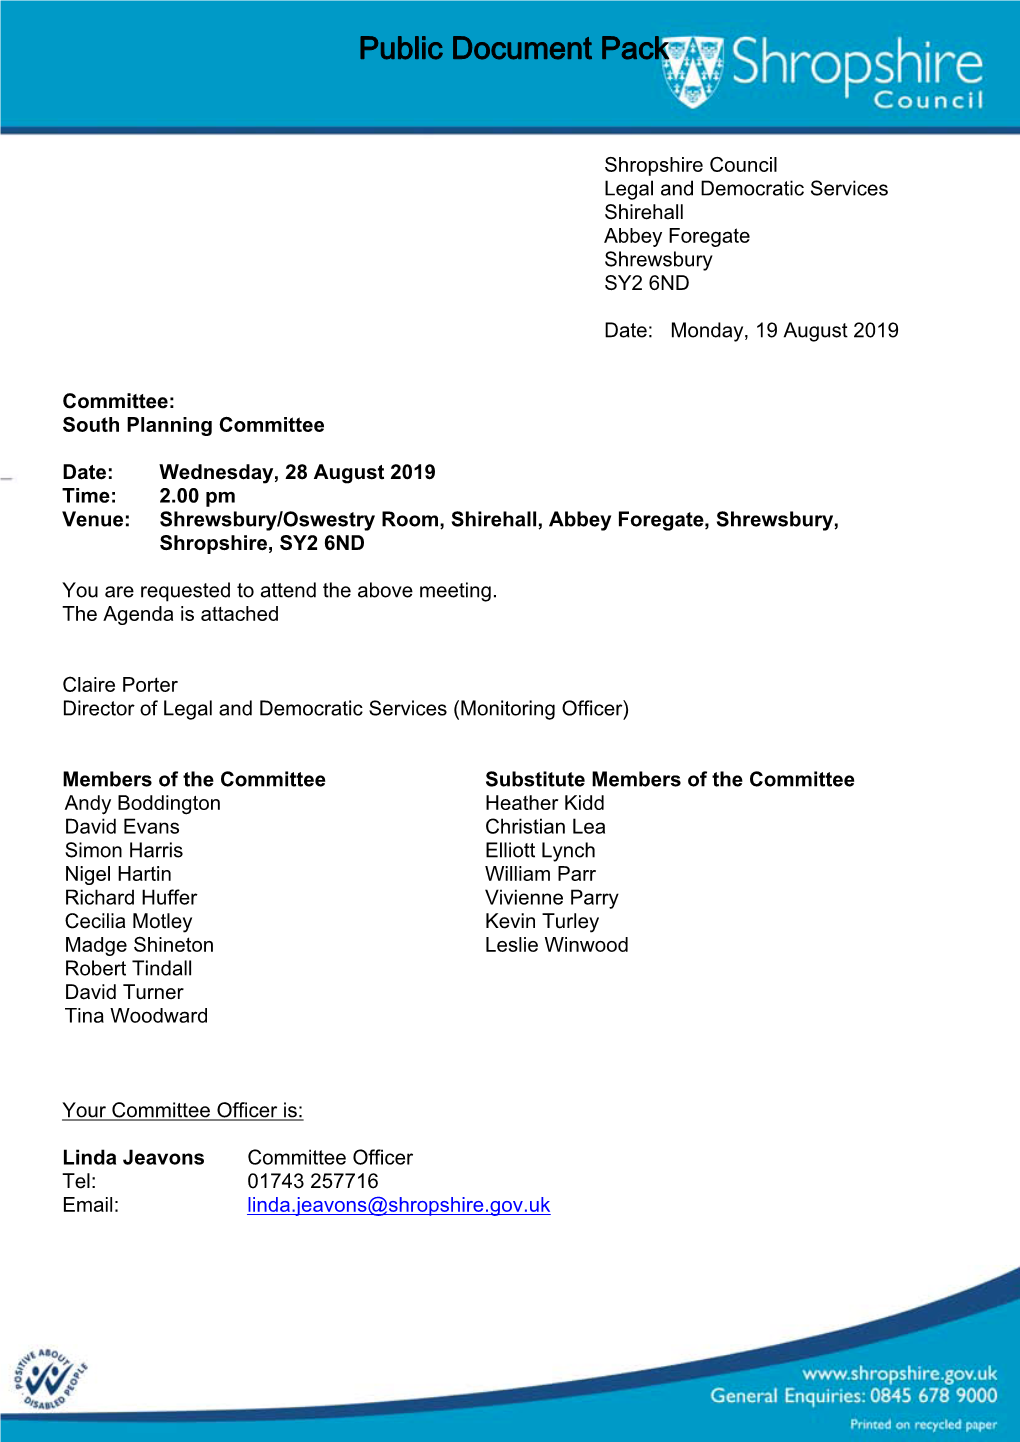 (Public Pack)Agenda Document for South Planning Committee, 28/08